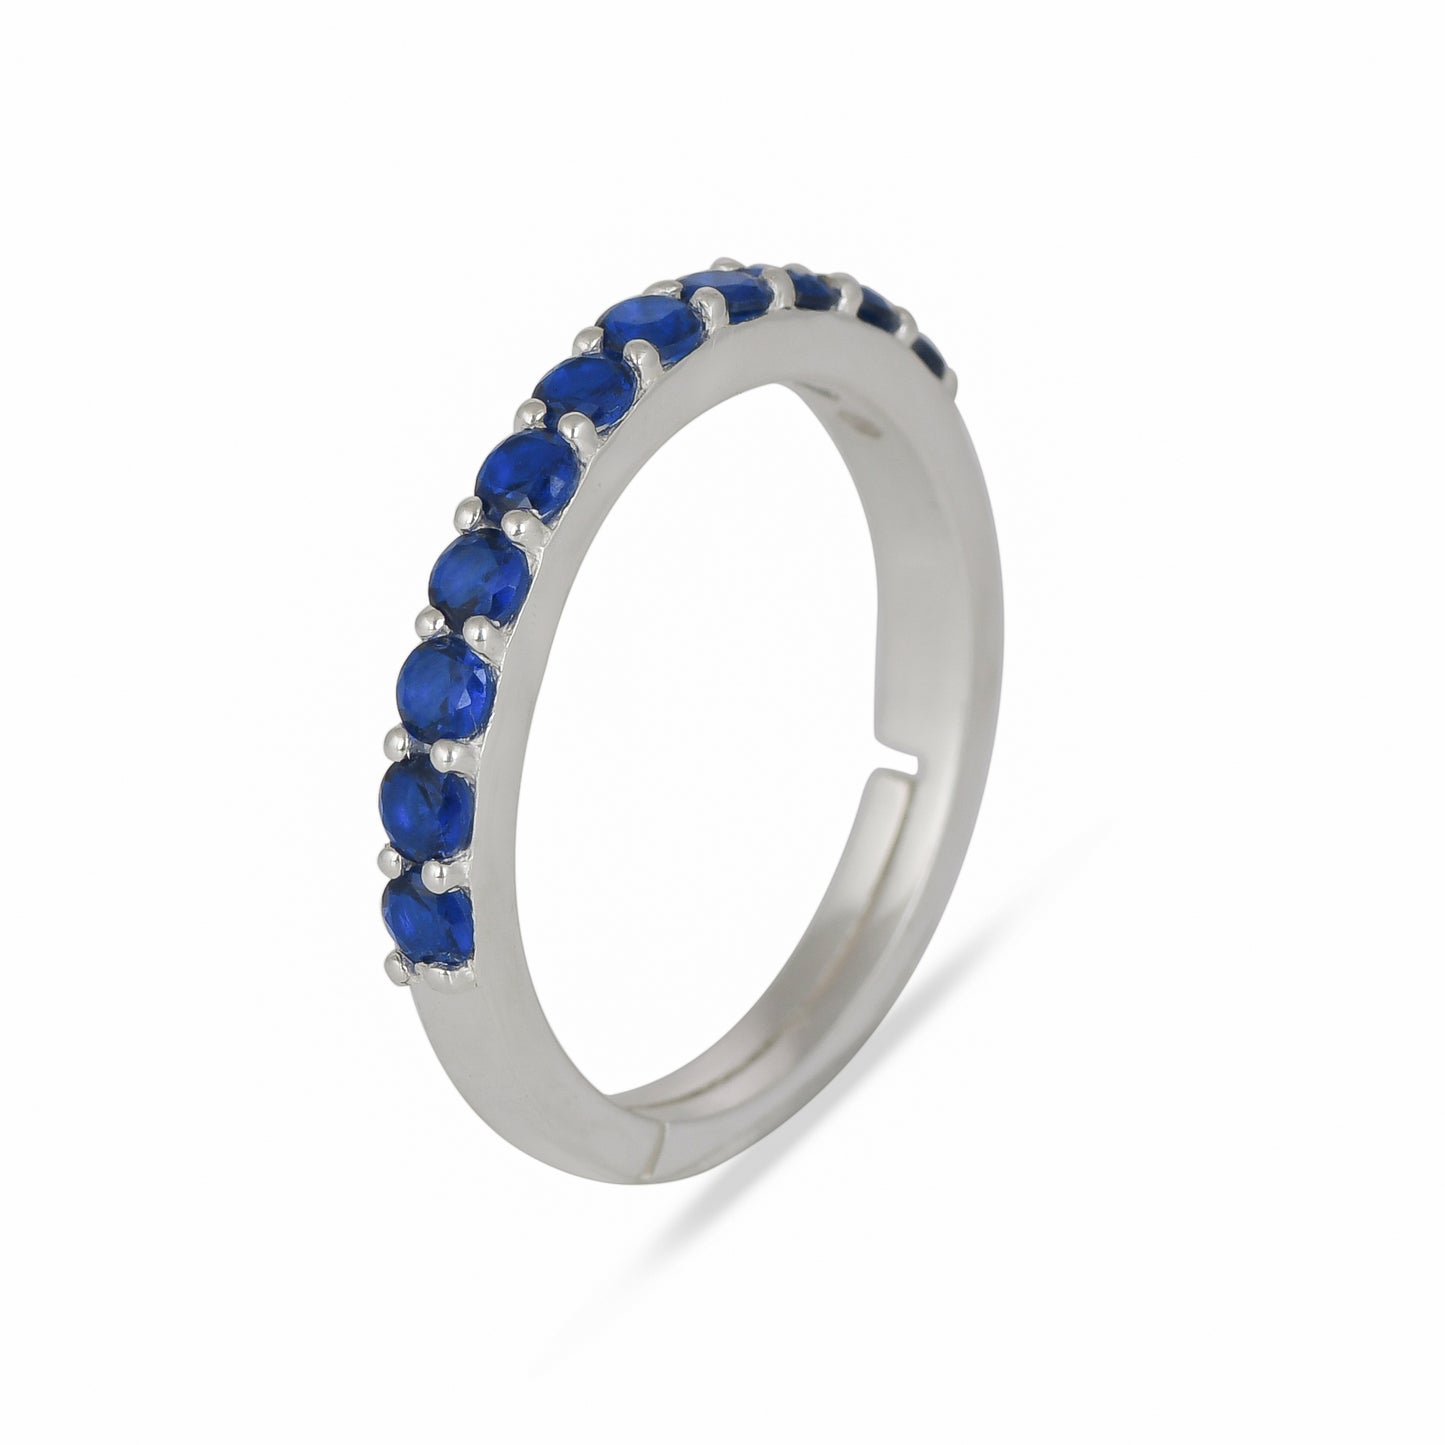 Blue-Cz-Band-Silver-Ring-For-Women